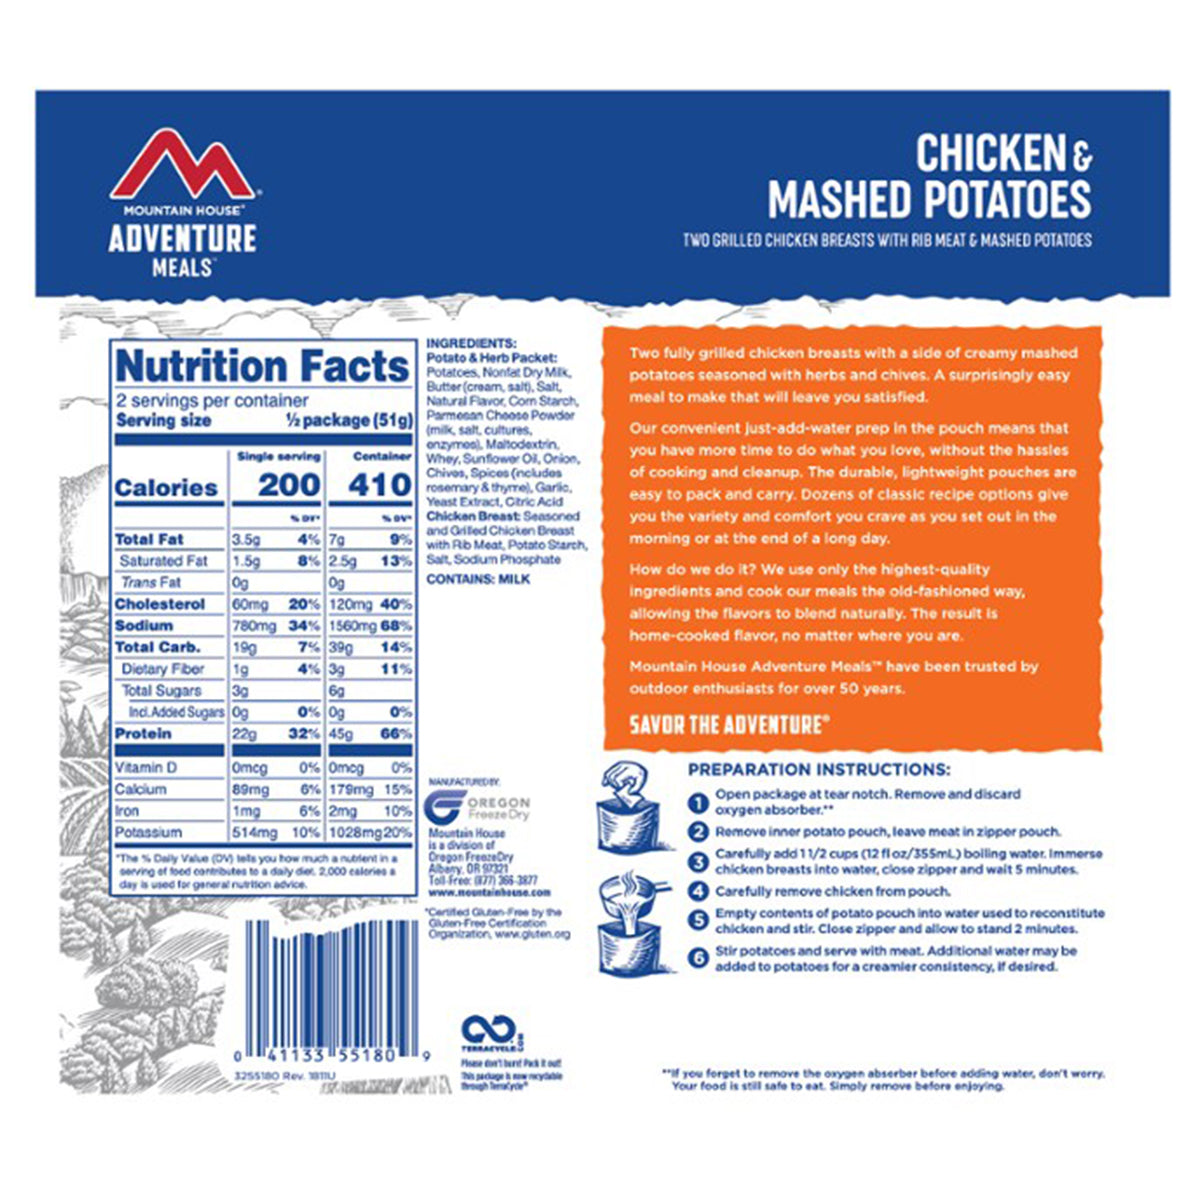 Mountain House Chicken & Mashed Potatoes in Mountain House Chicken & Mashed Potatoes by Mountain House | Camping - goHUNT Shop by GOHUNT | Mountain House - GOHUNT Shop